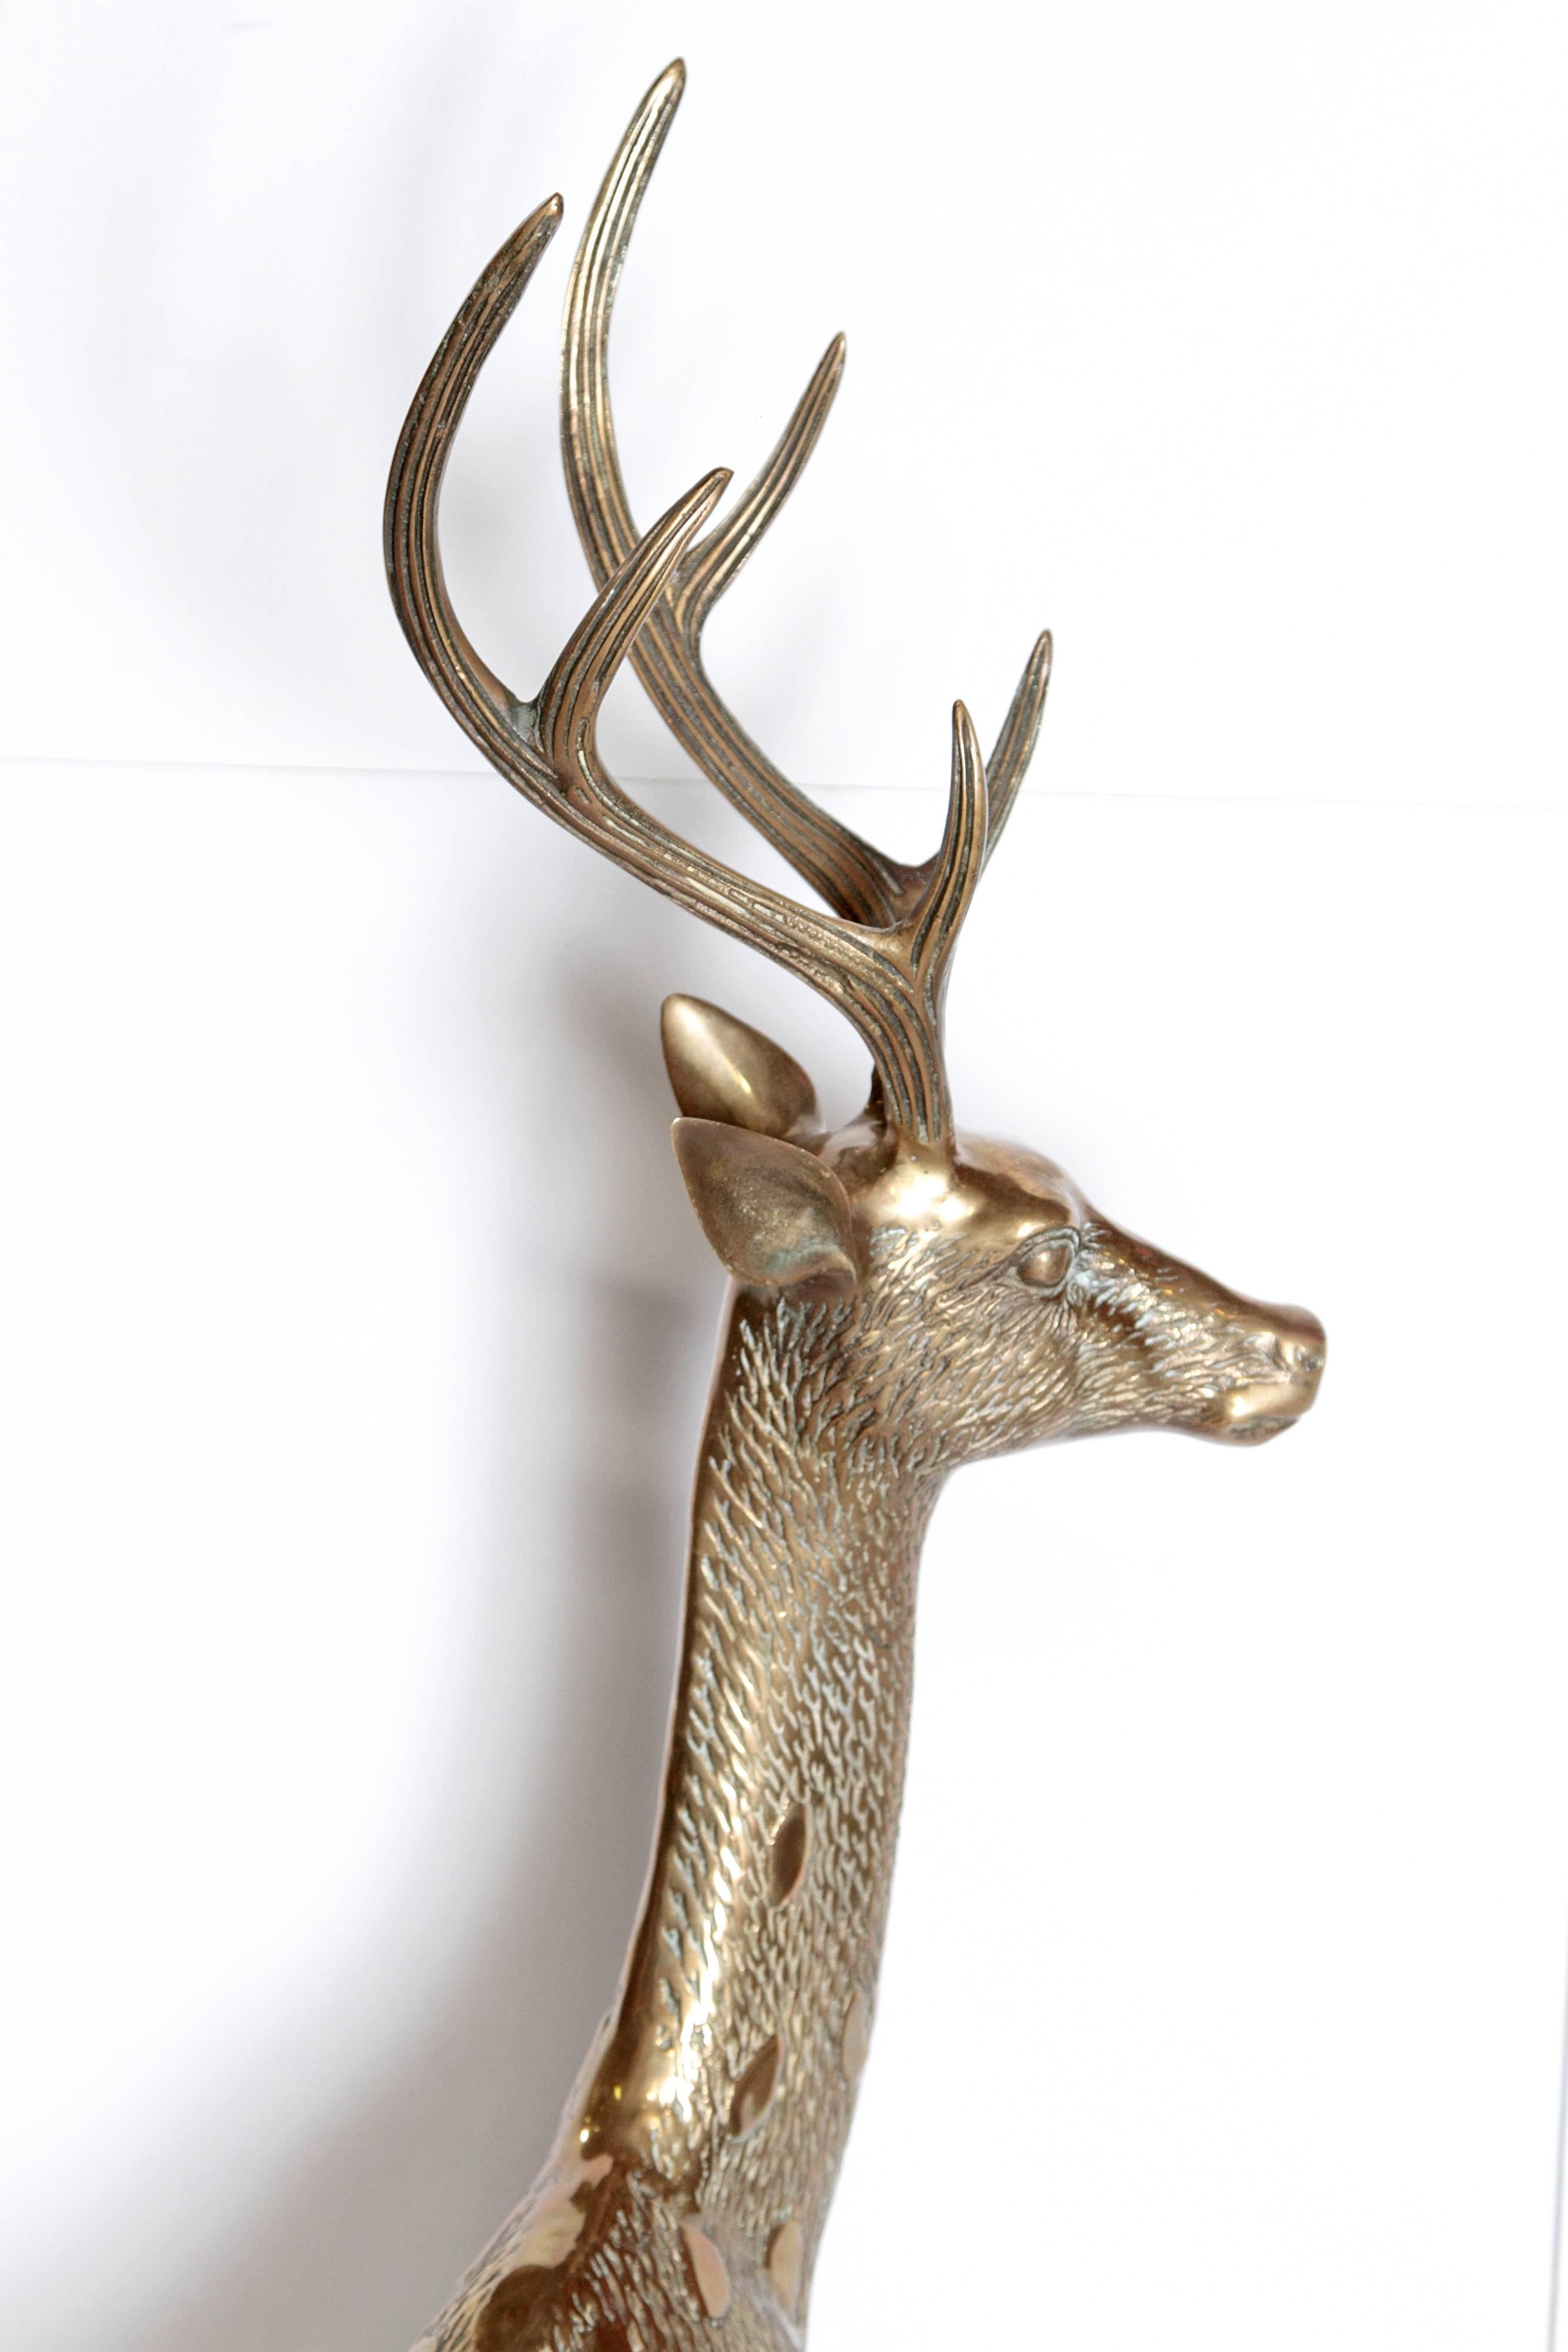 Large vintage solid brass deer sculpture in great condition. Measures 50 inches from floor to top of antler and 33 inches from hoof to nose.